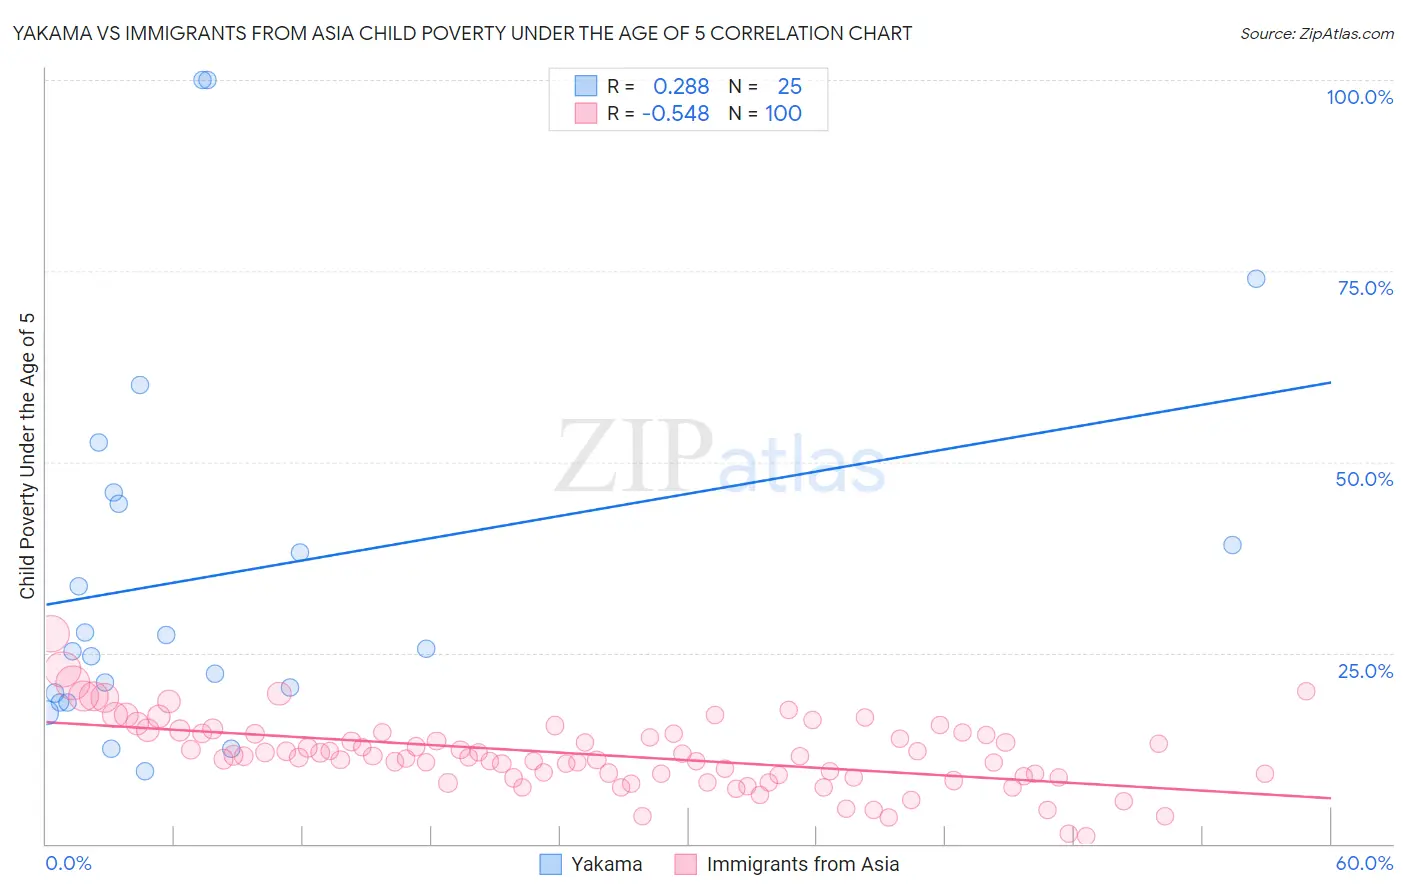 Yakama vs Immigrants from Asia Child Poverty Under the Age of 5